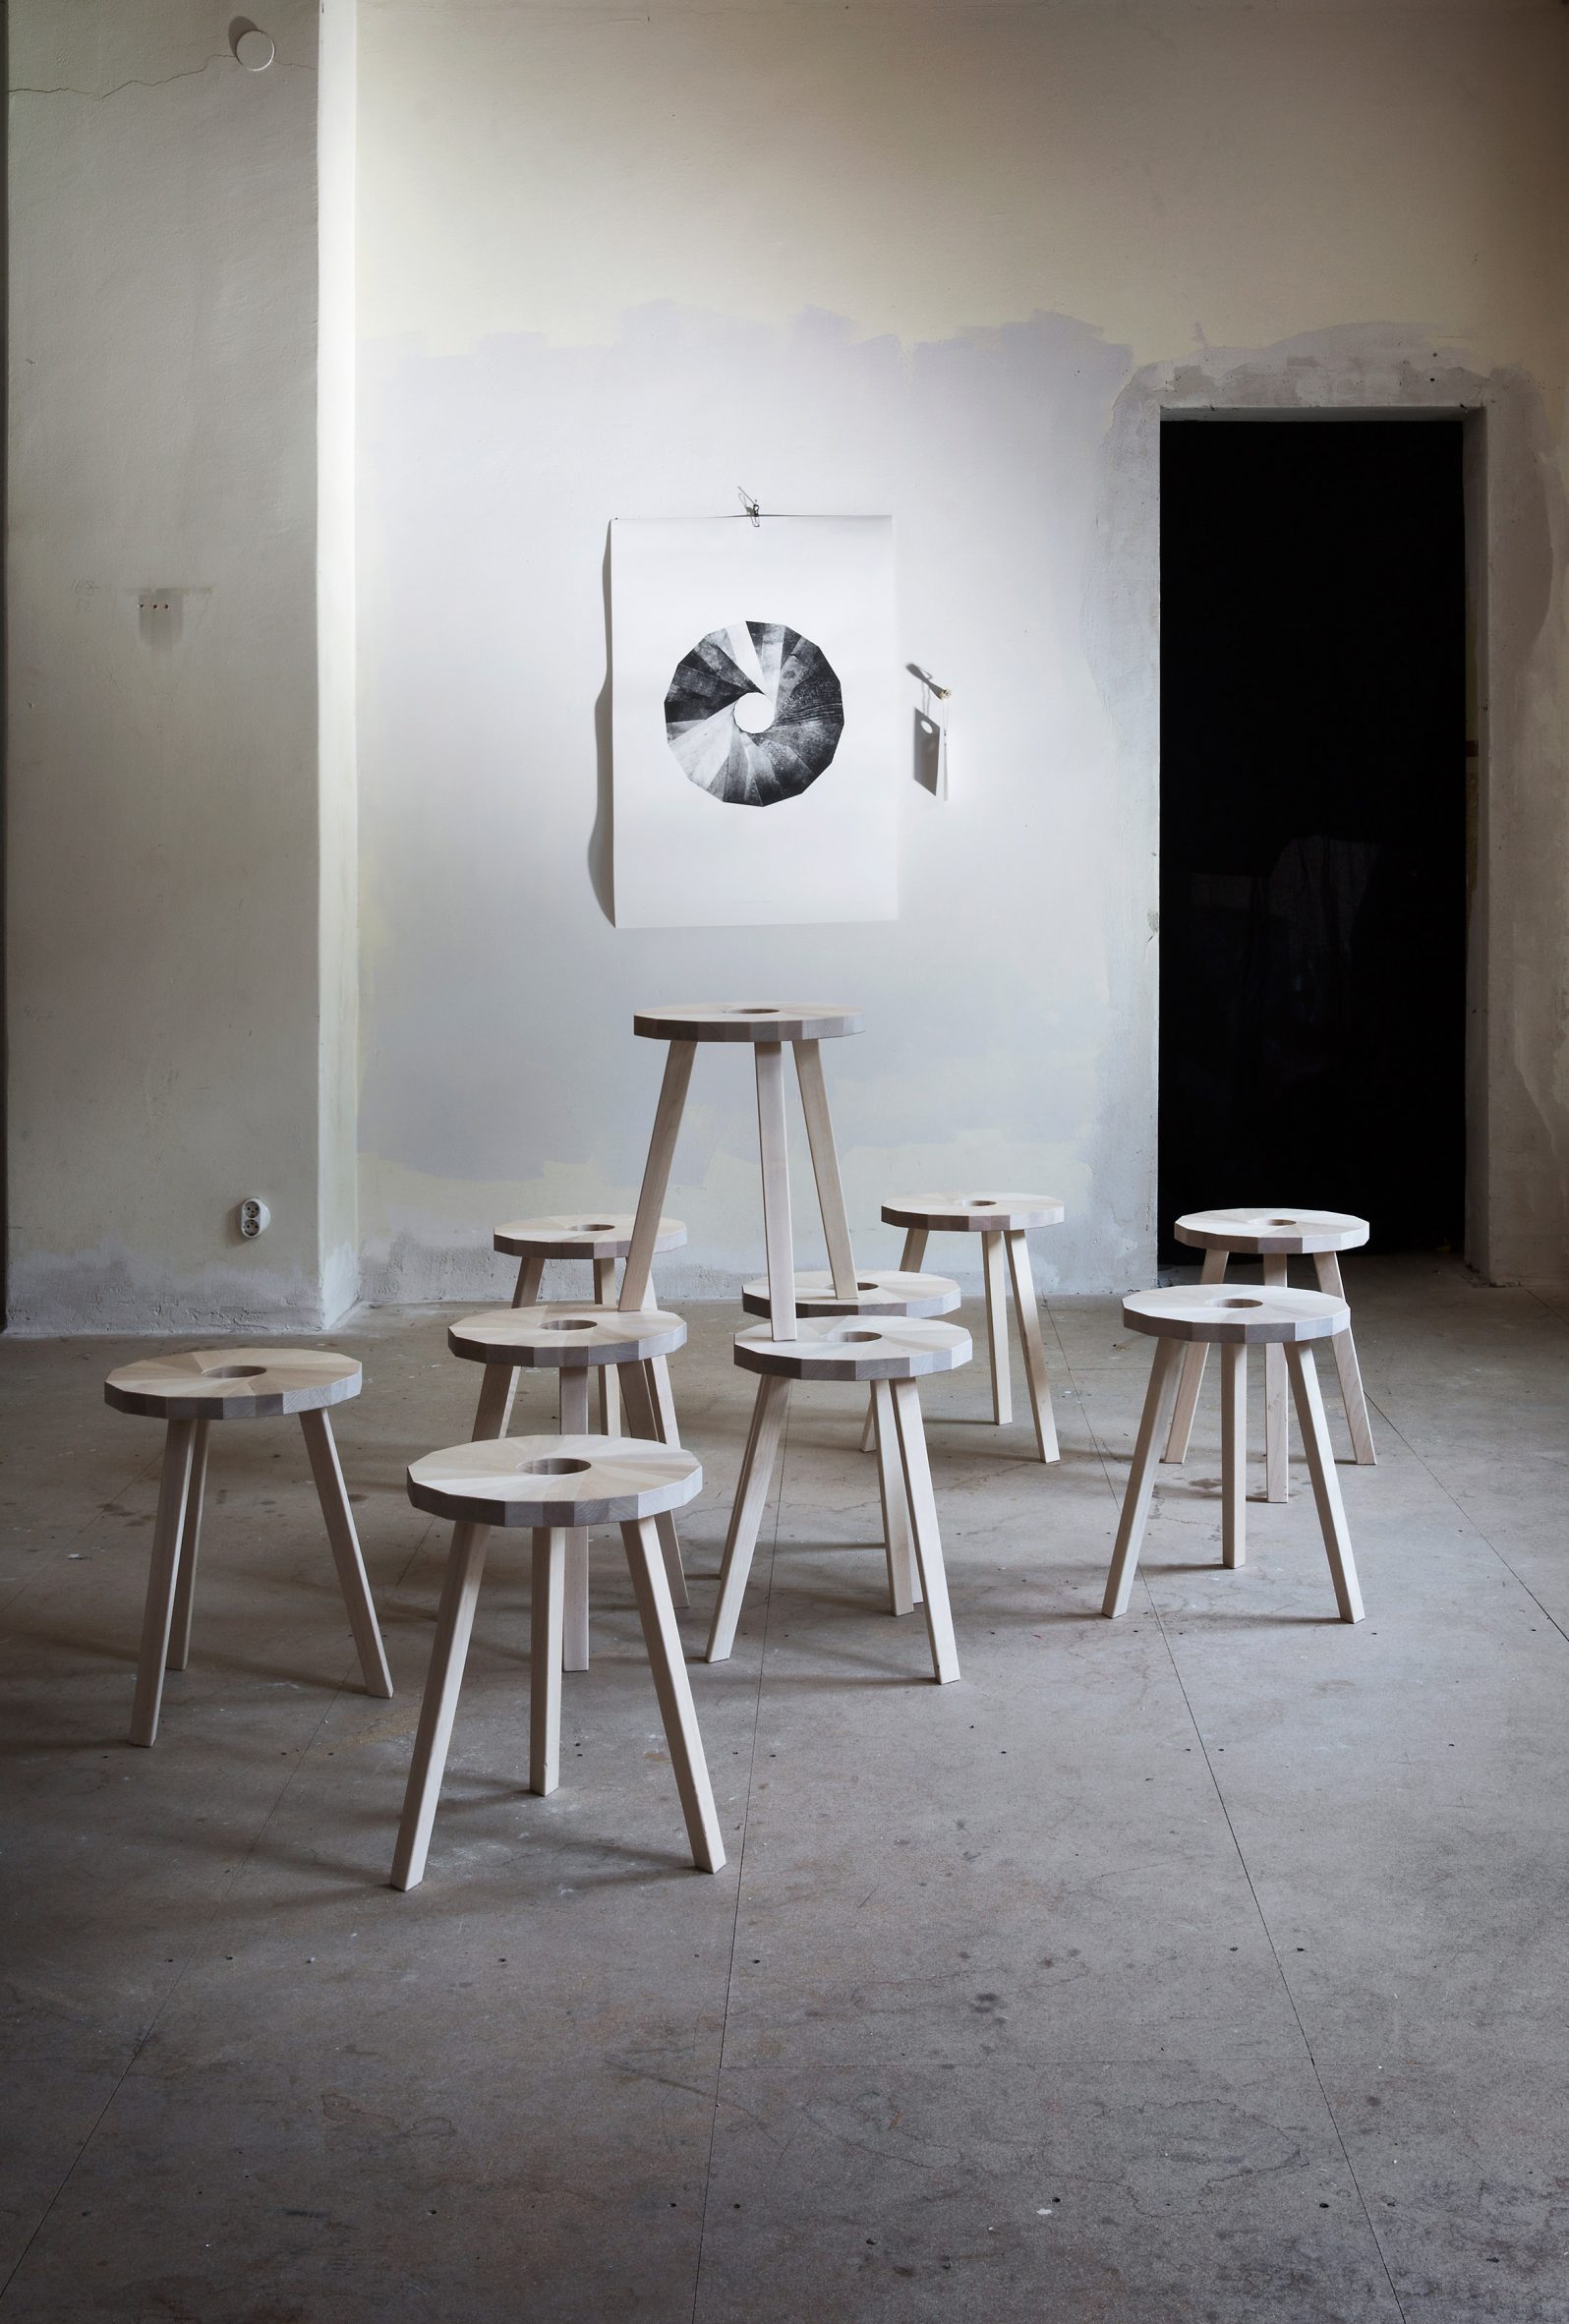 Multiple Lilla Snåland stools in a pale, industrial interior setting 